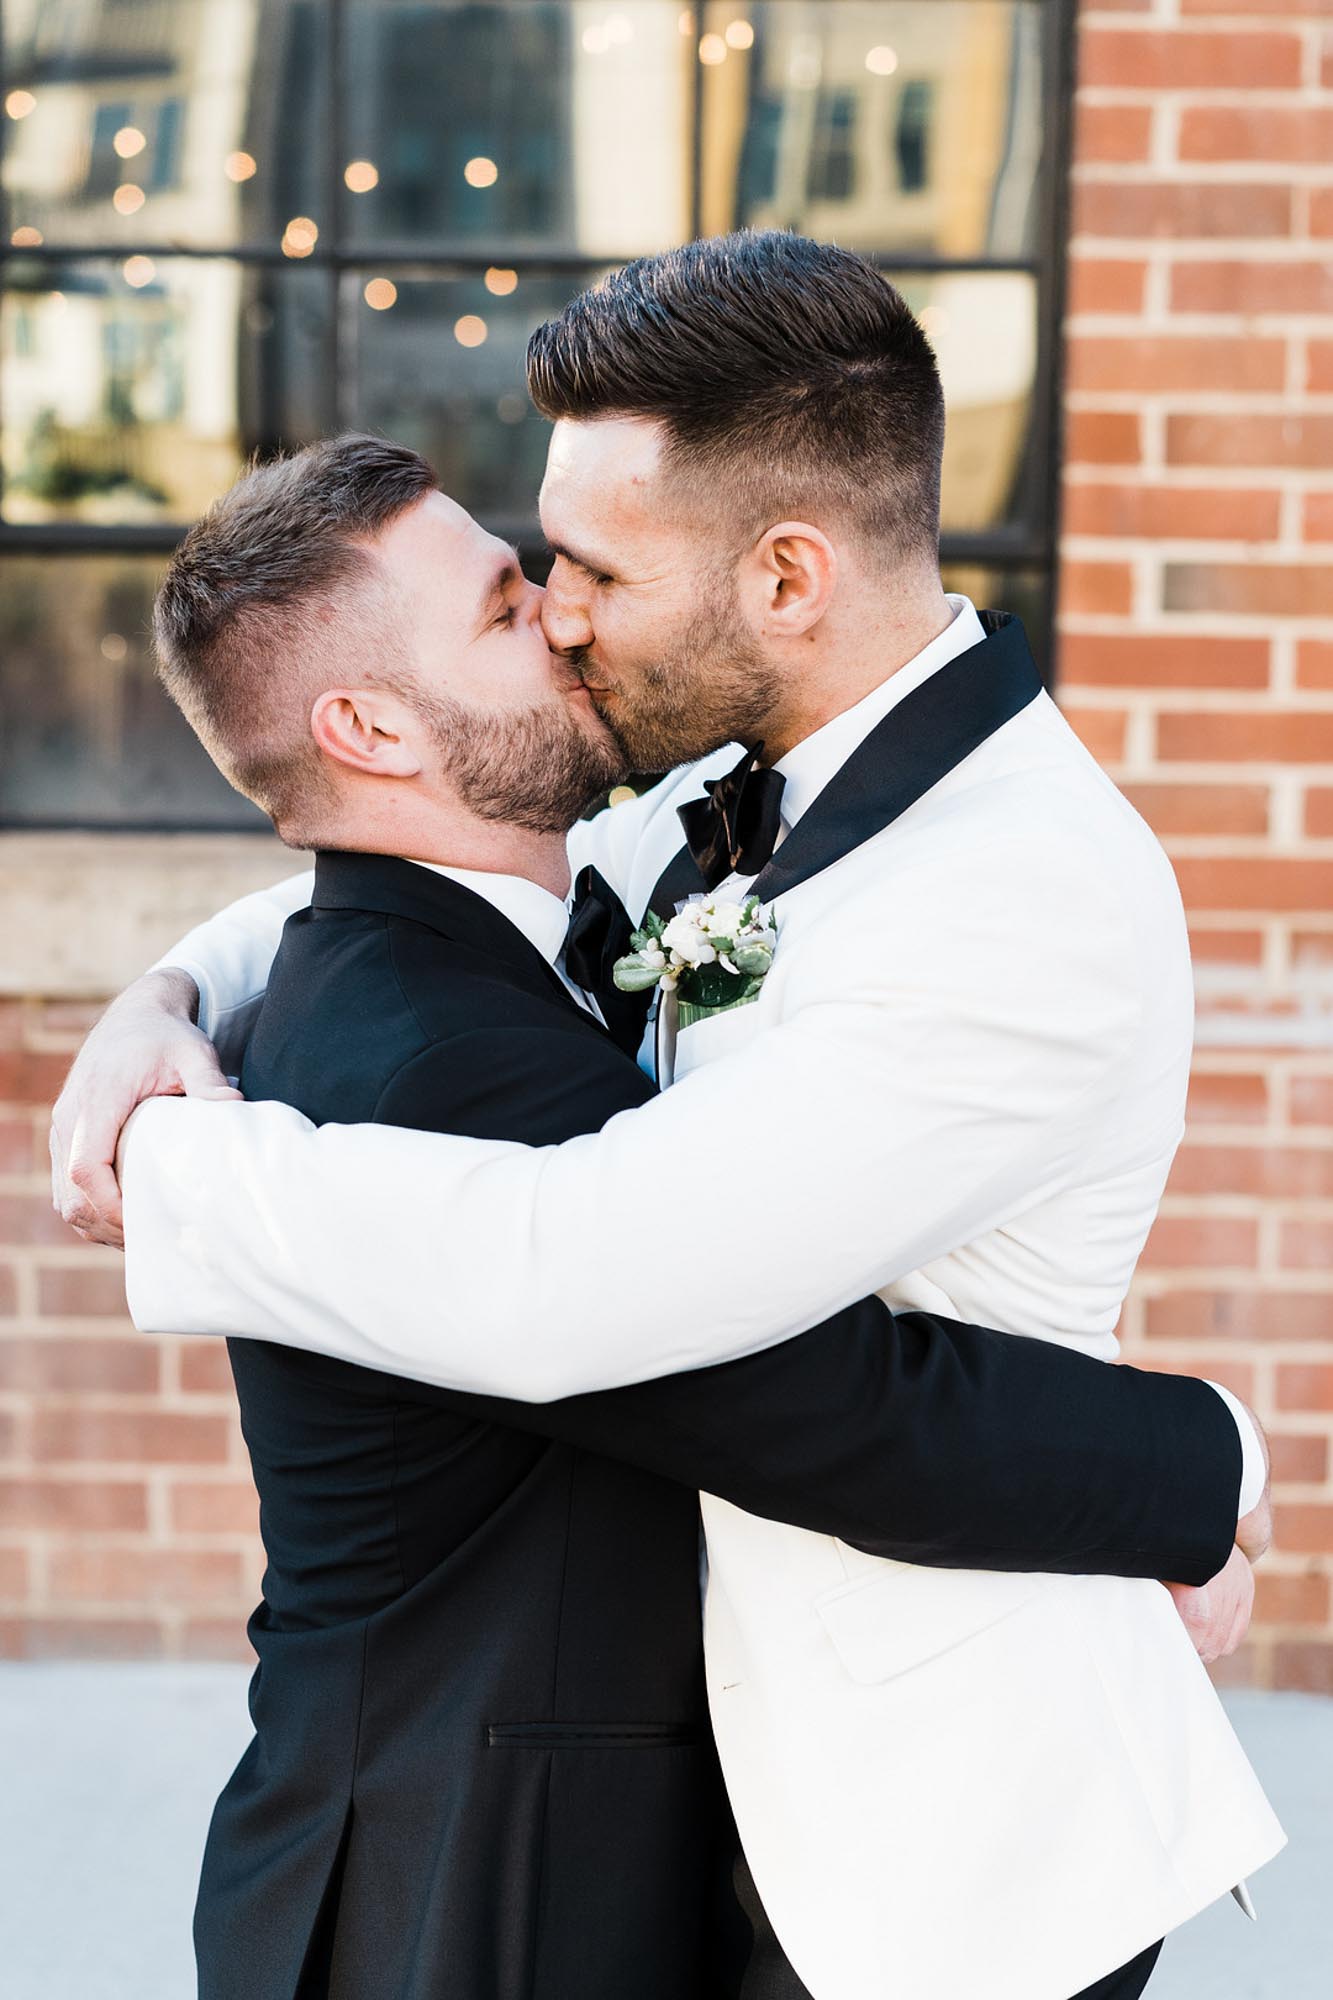 A roaring 20s wedding with lush greenery and pops of gold | Easterday Creative | Featured on Equally Wed, the leading LGBTQ+ wedding magazine